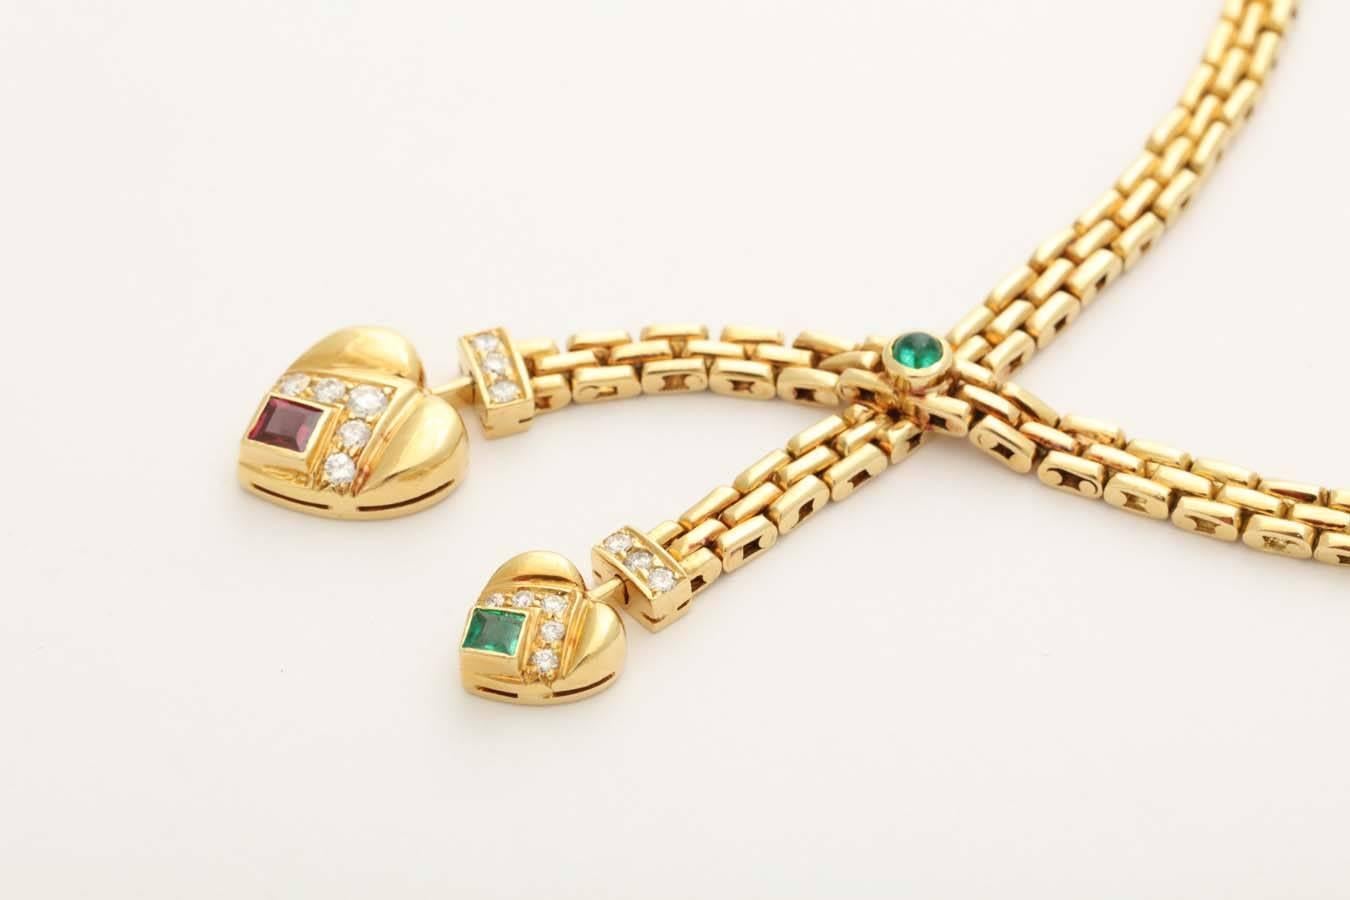 Late 20th Century Cartier Retro Style Gold and Gemstone Necklace